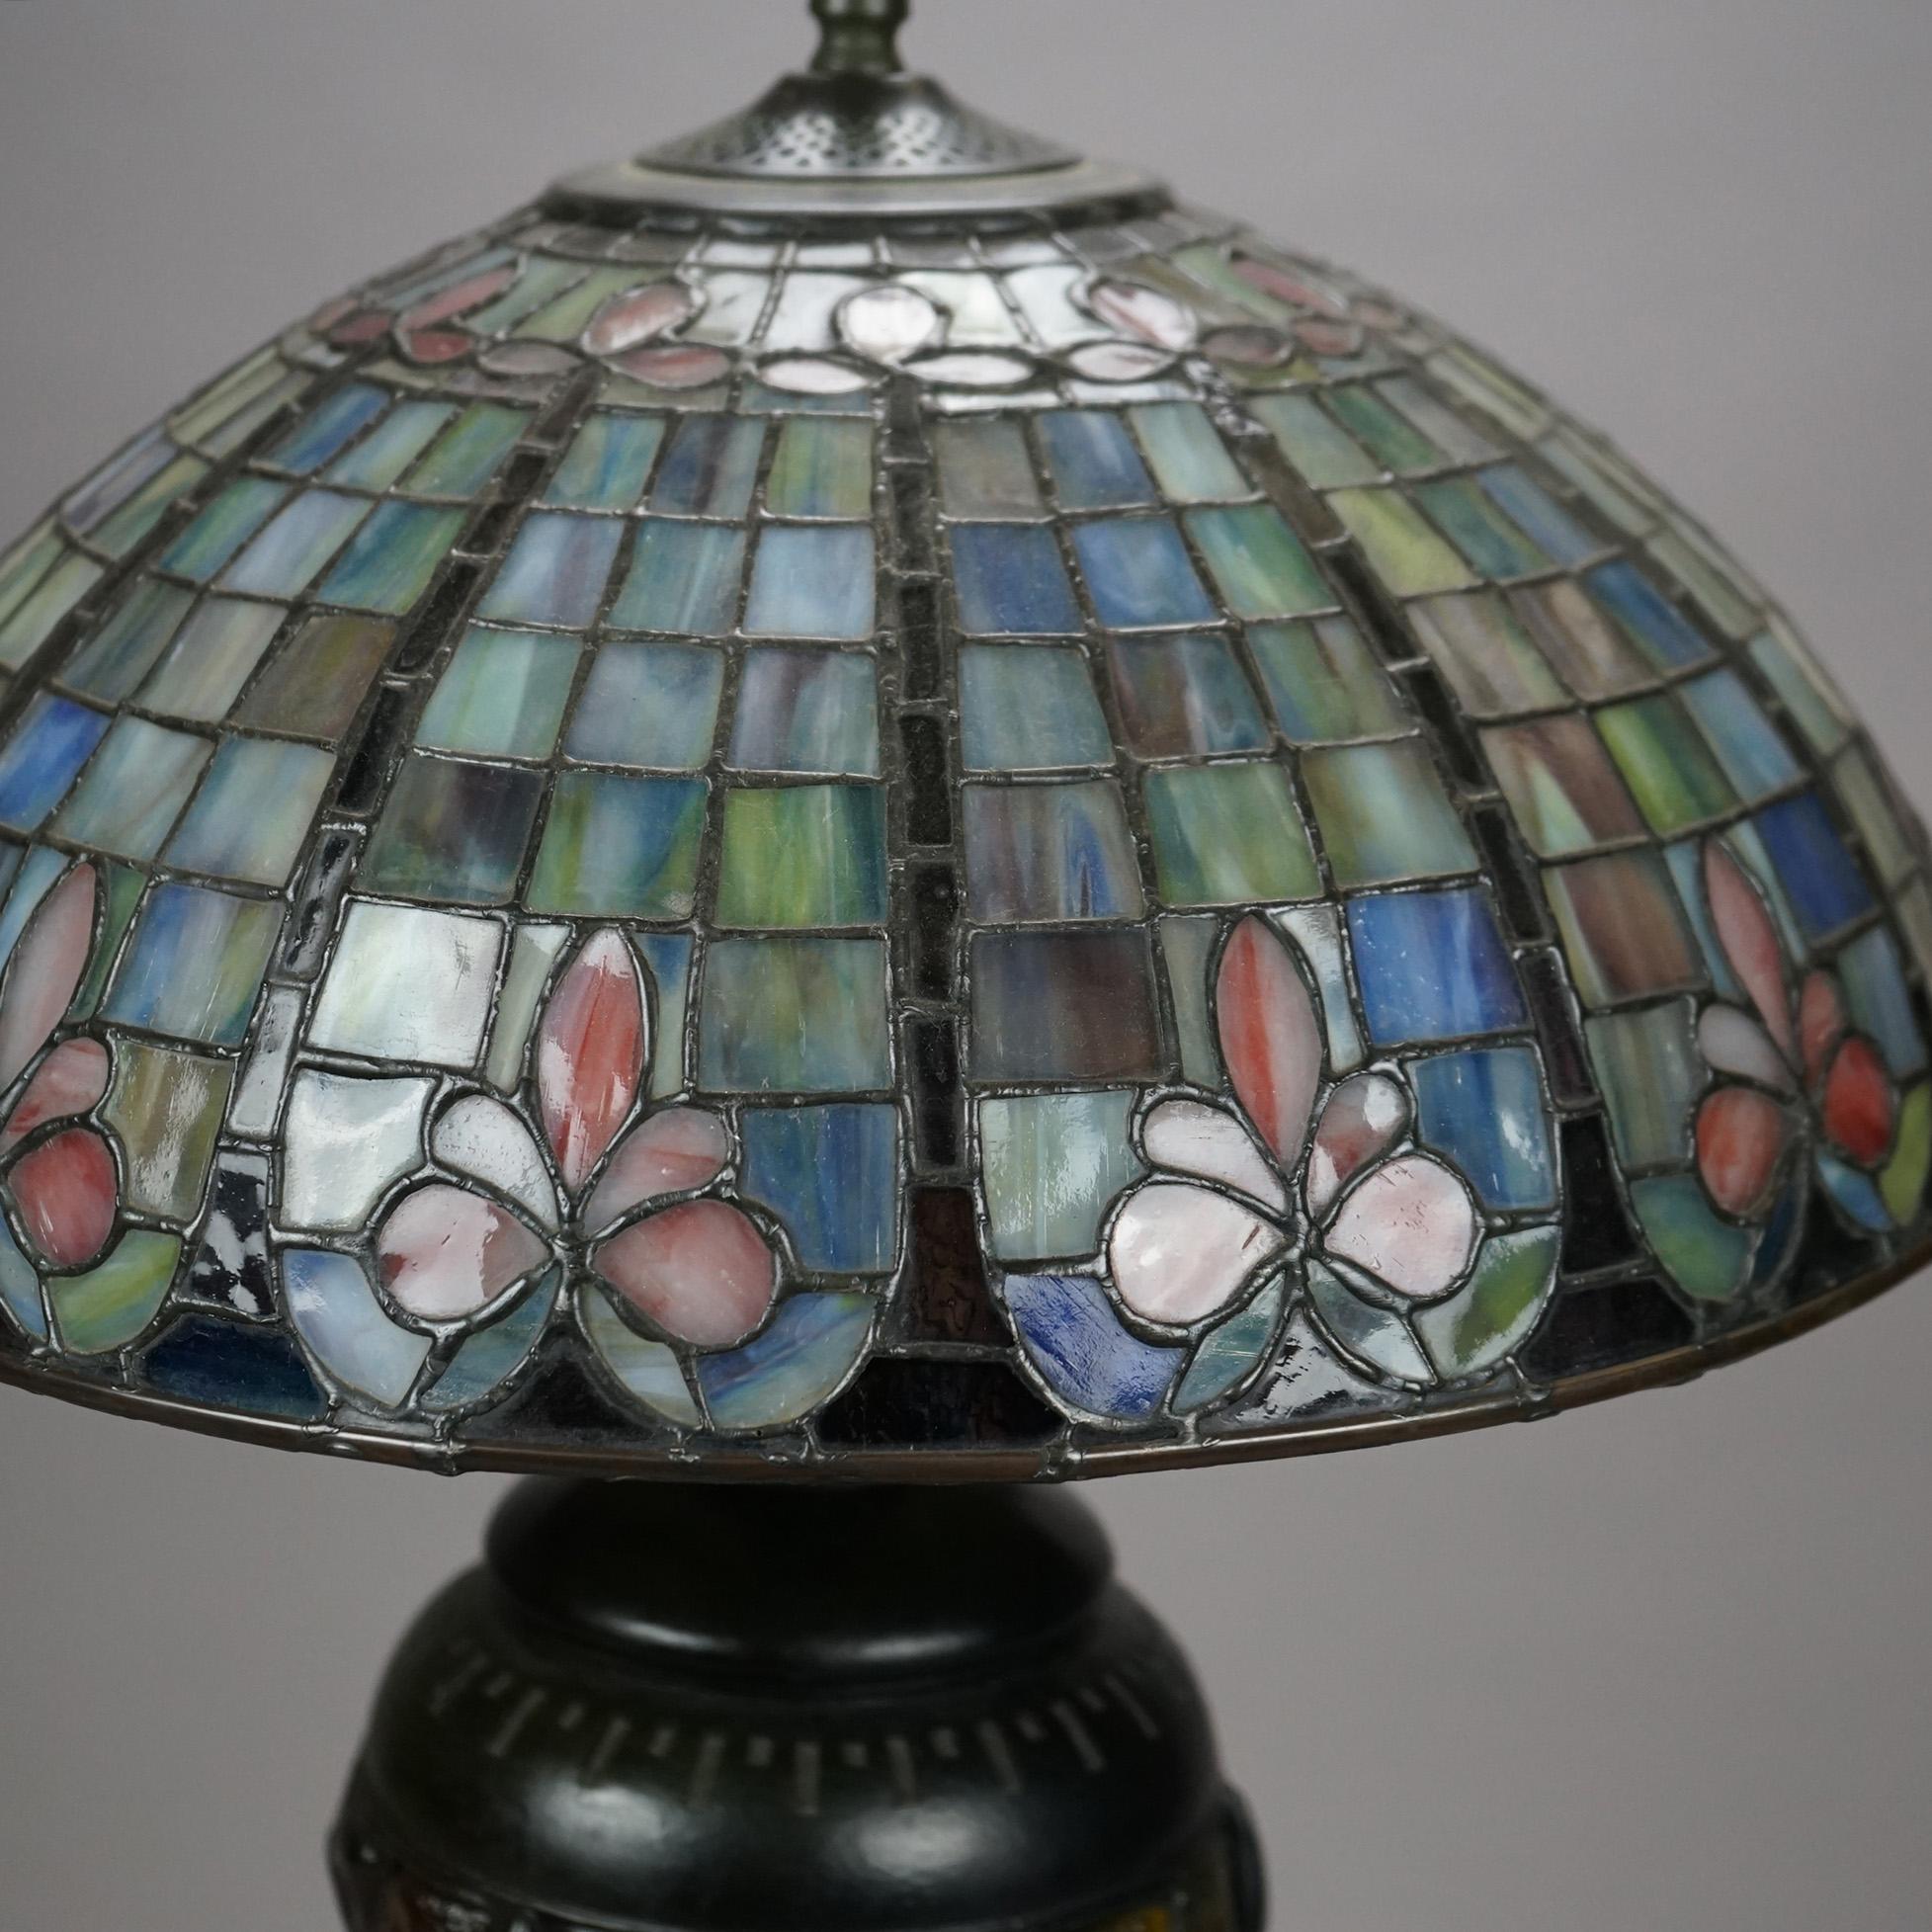 20th Century Arts & Crafts Leaded Glass Table Lamp with Jeweled Glass Base 20th C